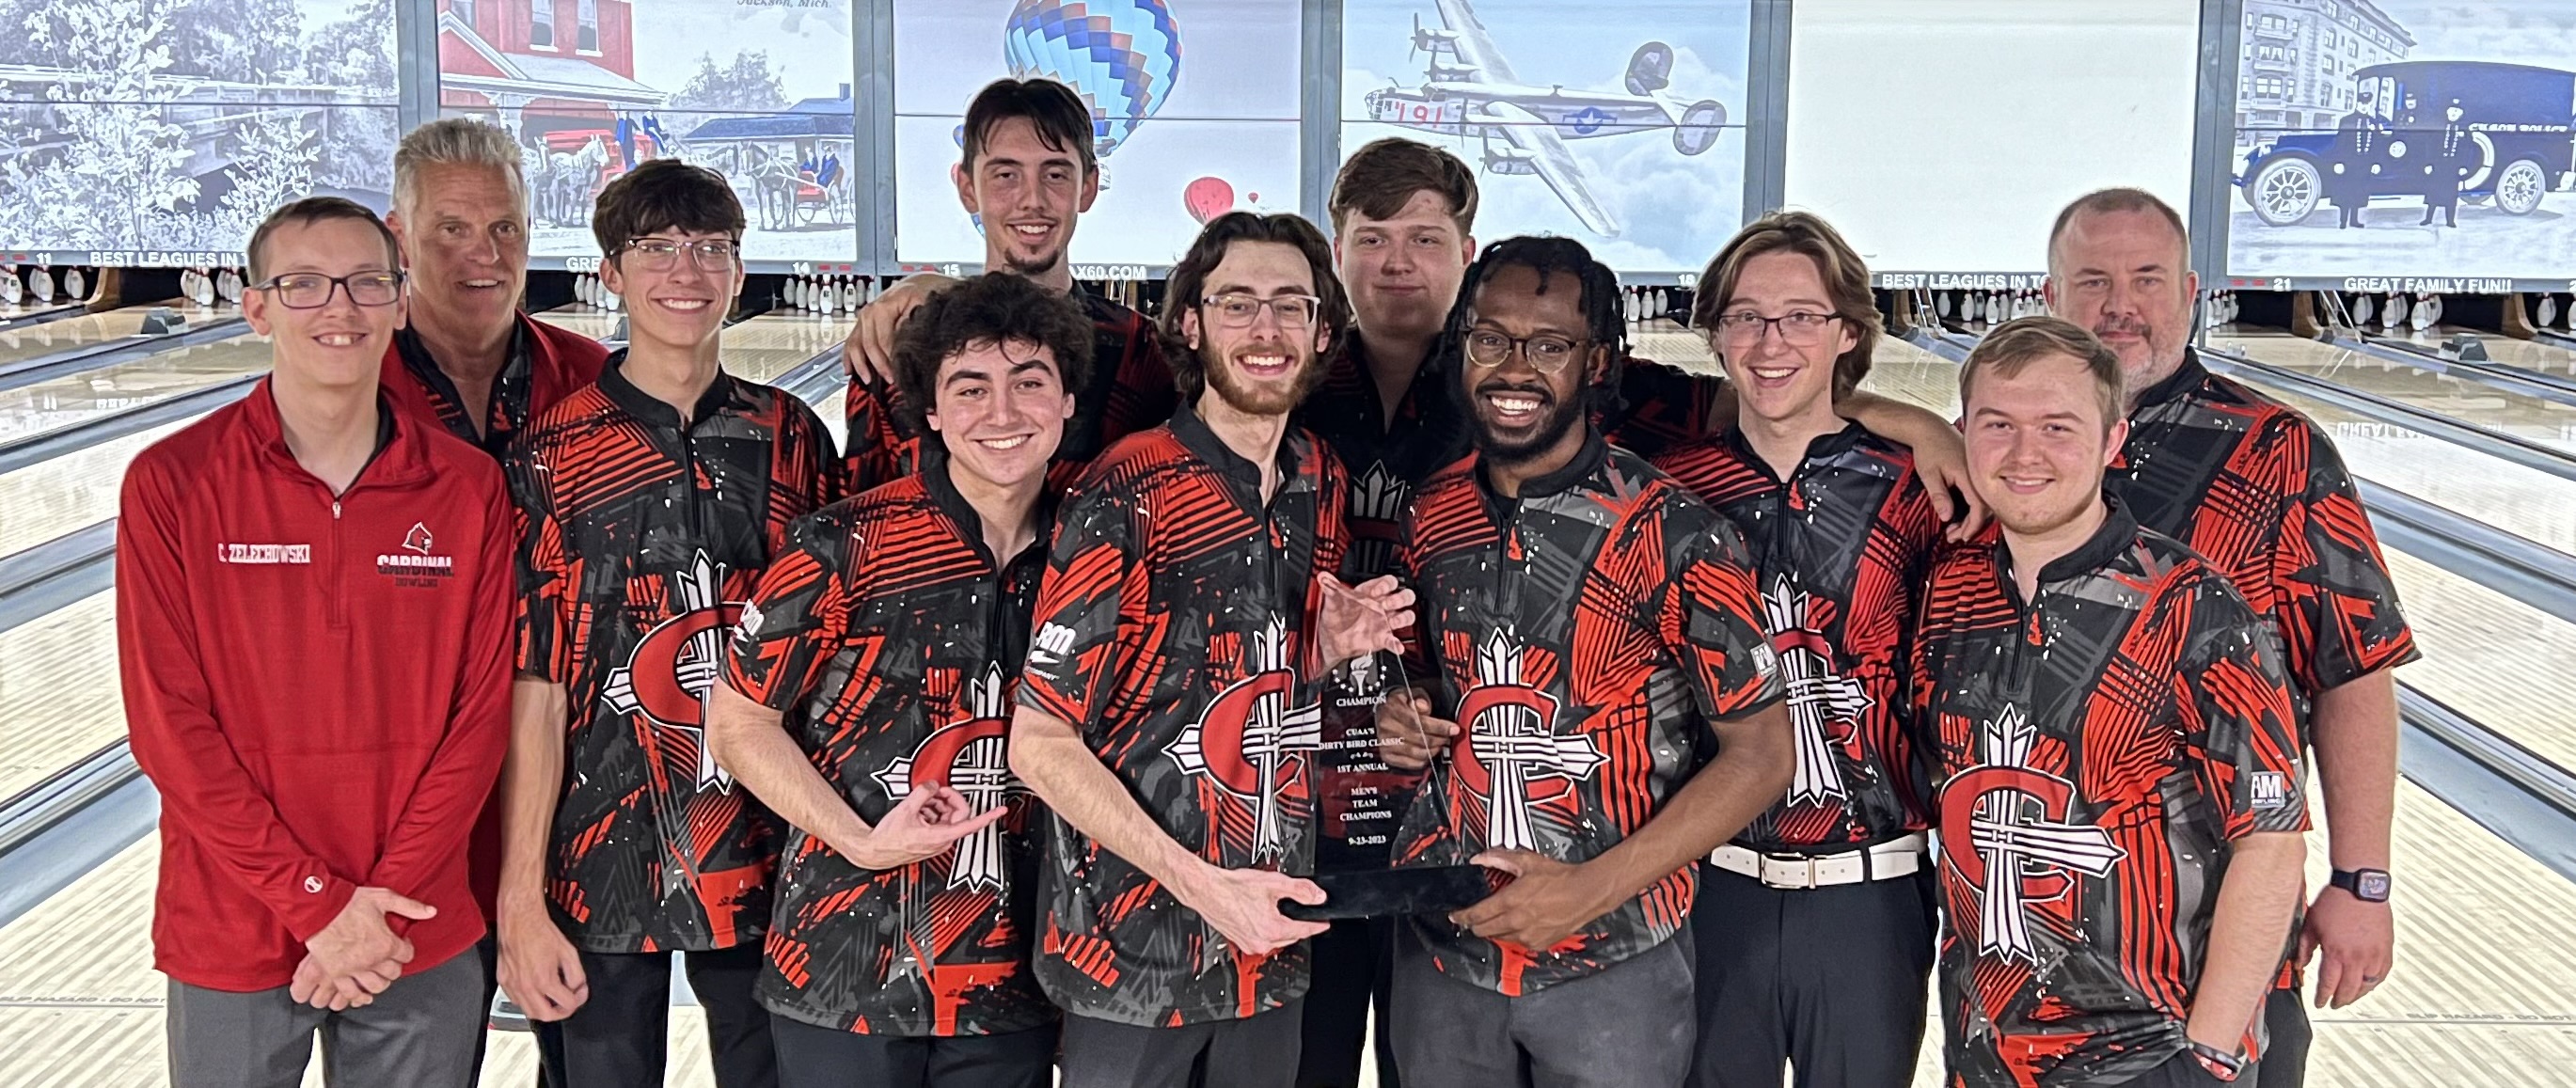 Men's Bowling takes first at the Inaugural Dirty Bird Classic